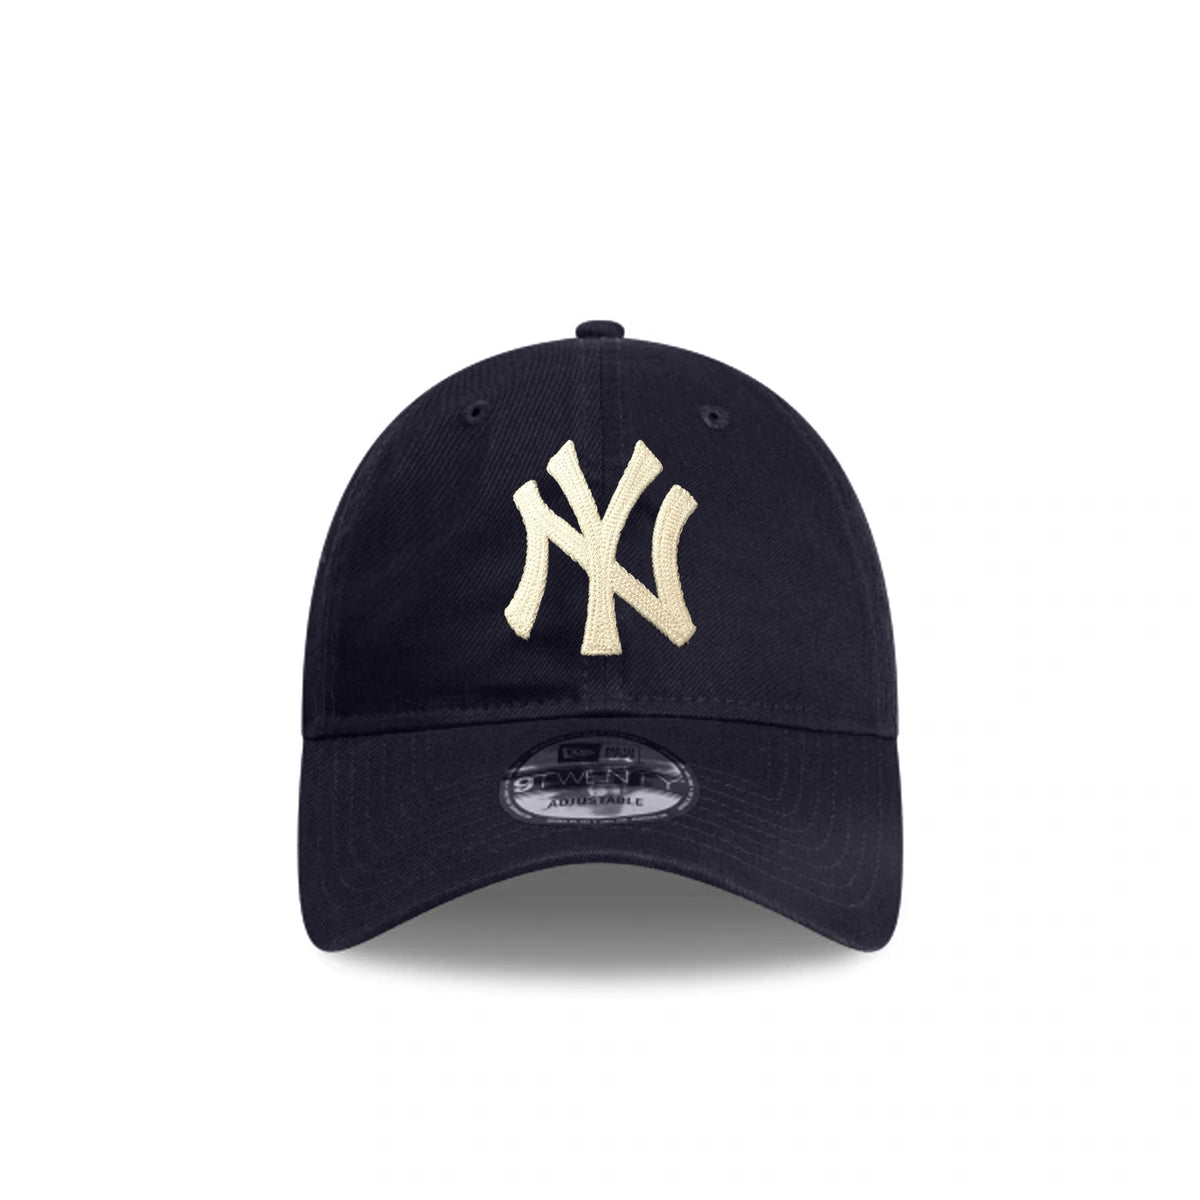 Yankees 9Forty Chain Stitch Snapback - Navy